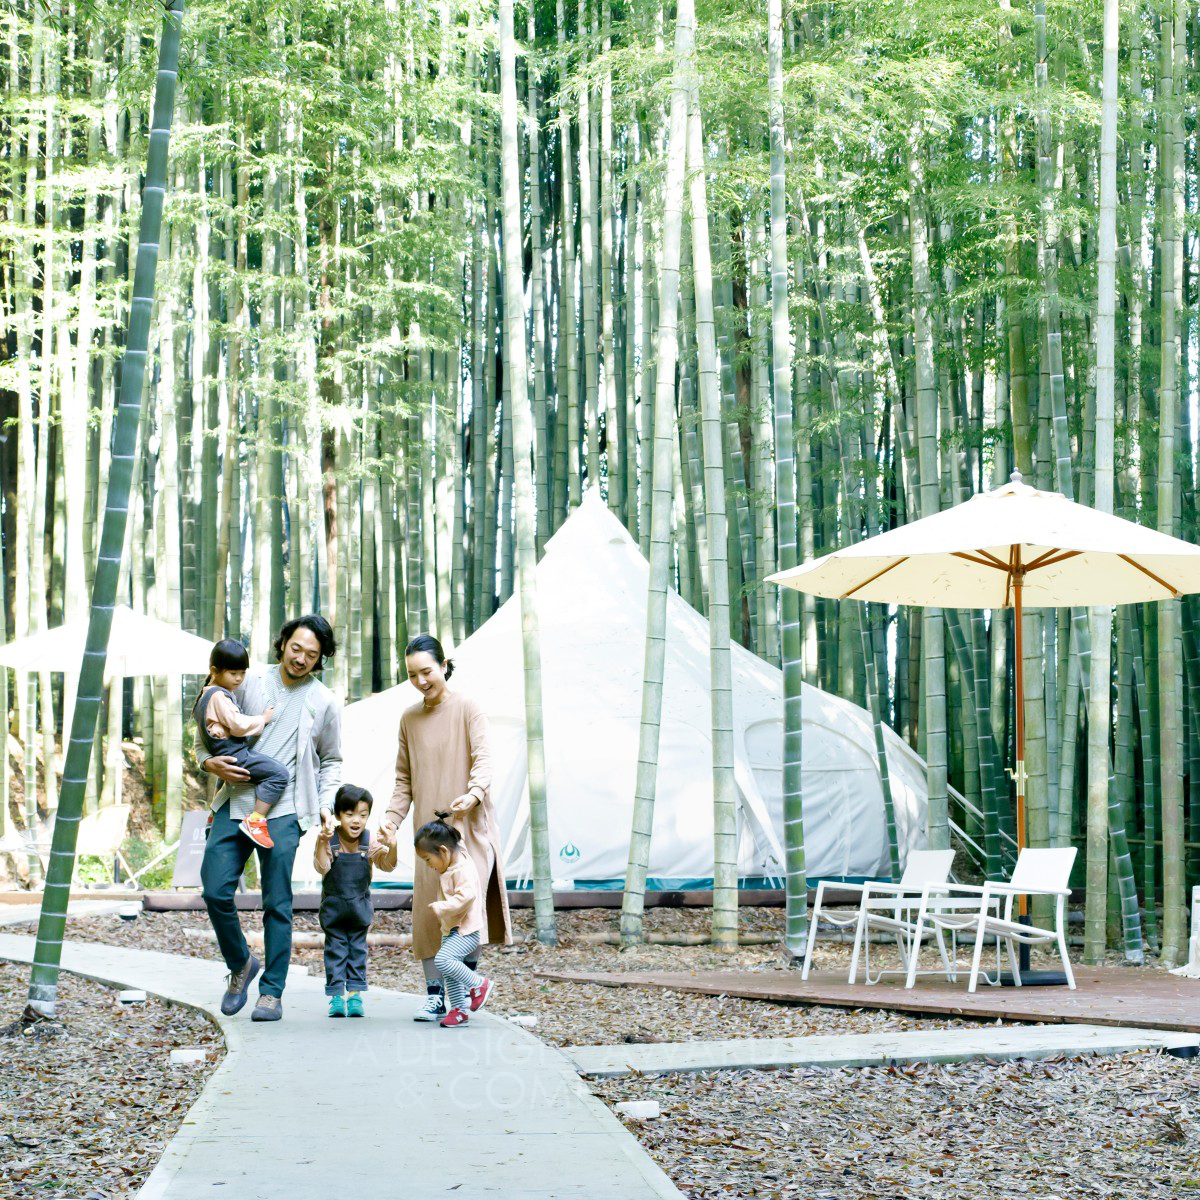 Naoyuki Aoki wins Silver at the prestigious A' Hospitality, Recreation, Travel and Tourism Design Award with The Bamboo Forest Simple Lodging.